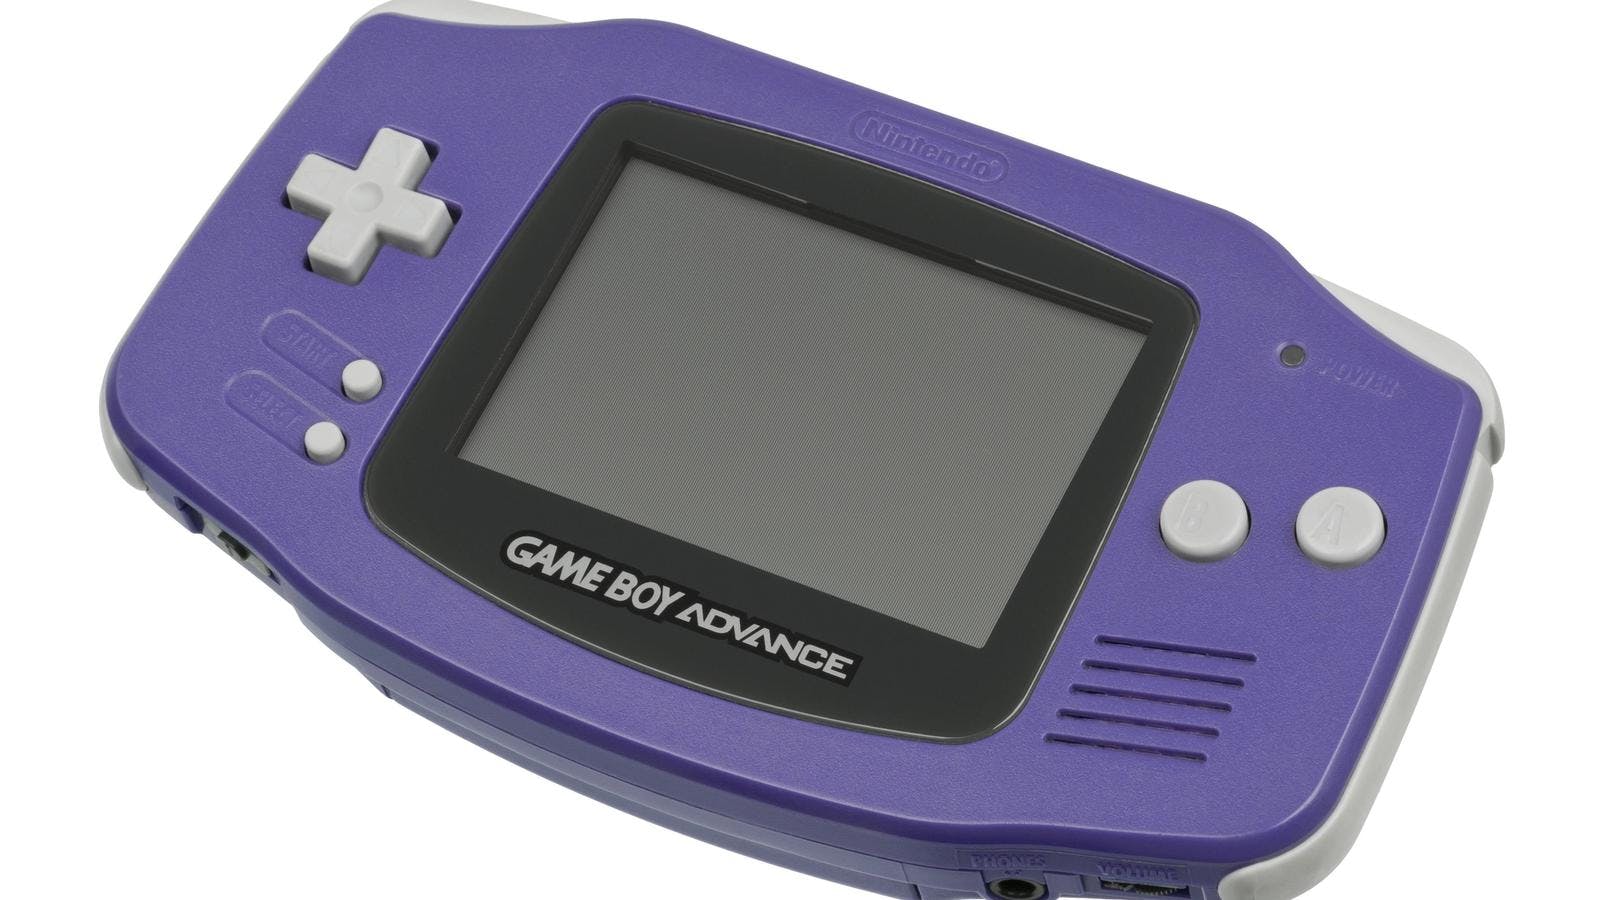 An image of the purple Game Boy Advance console.